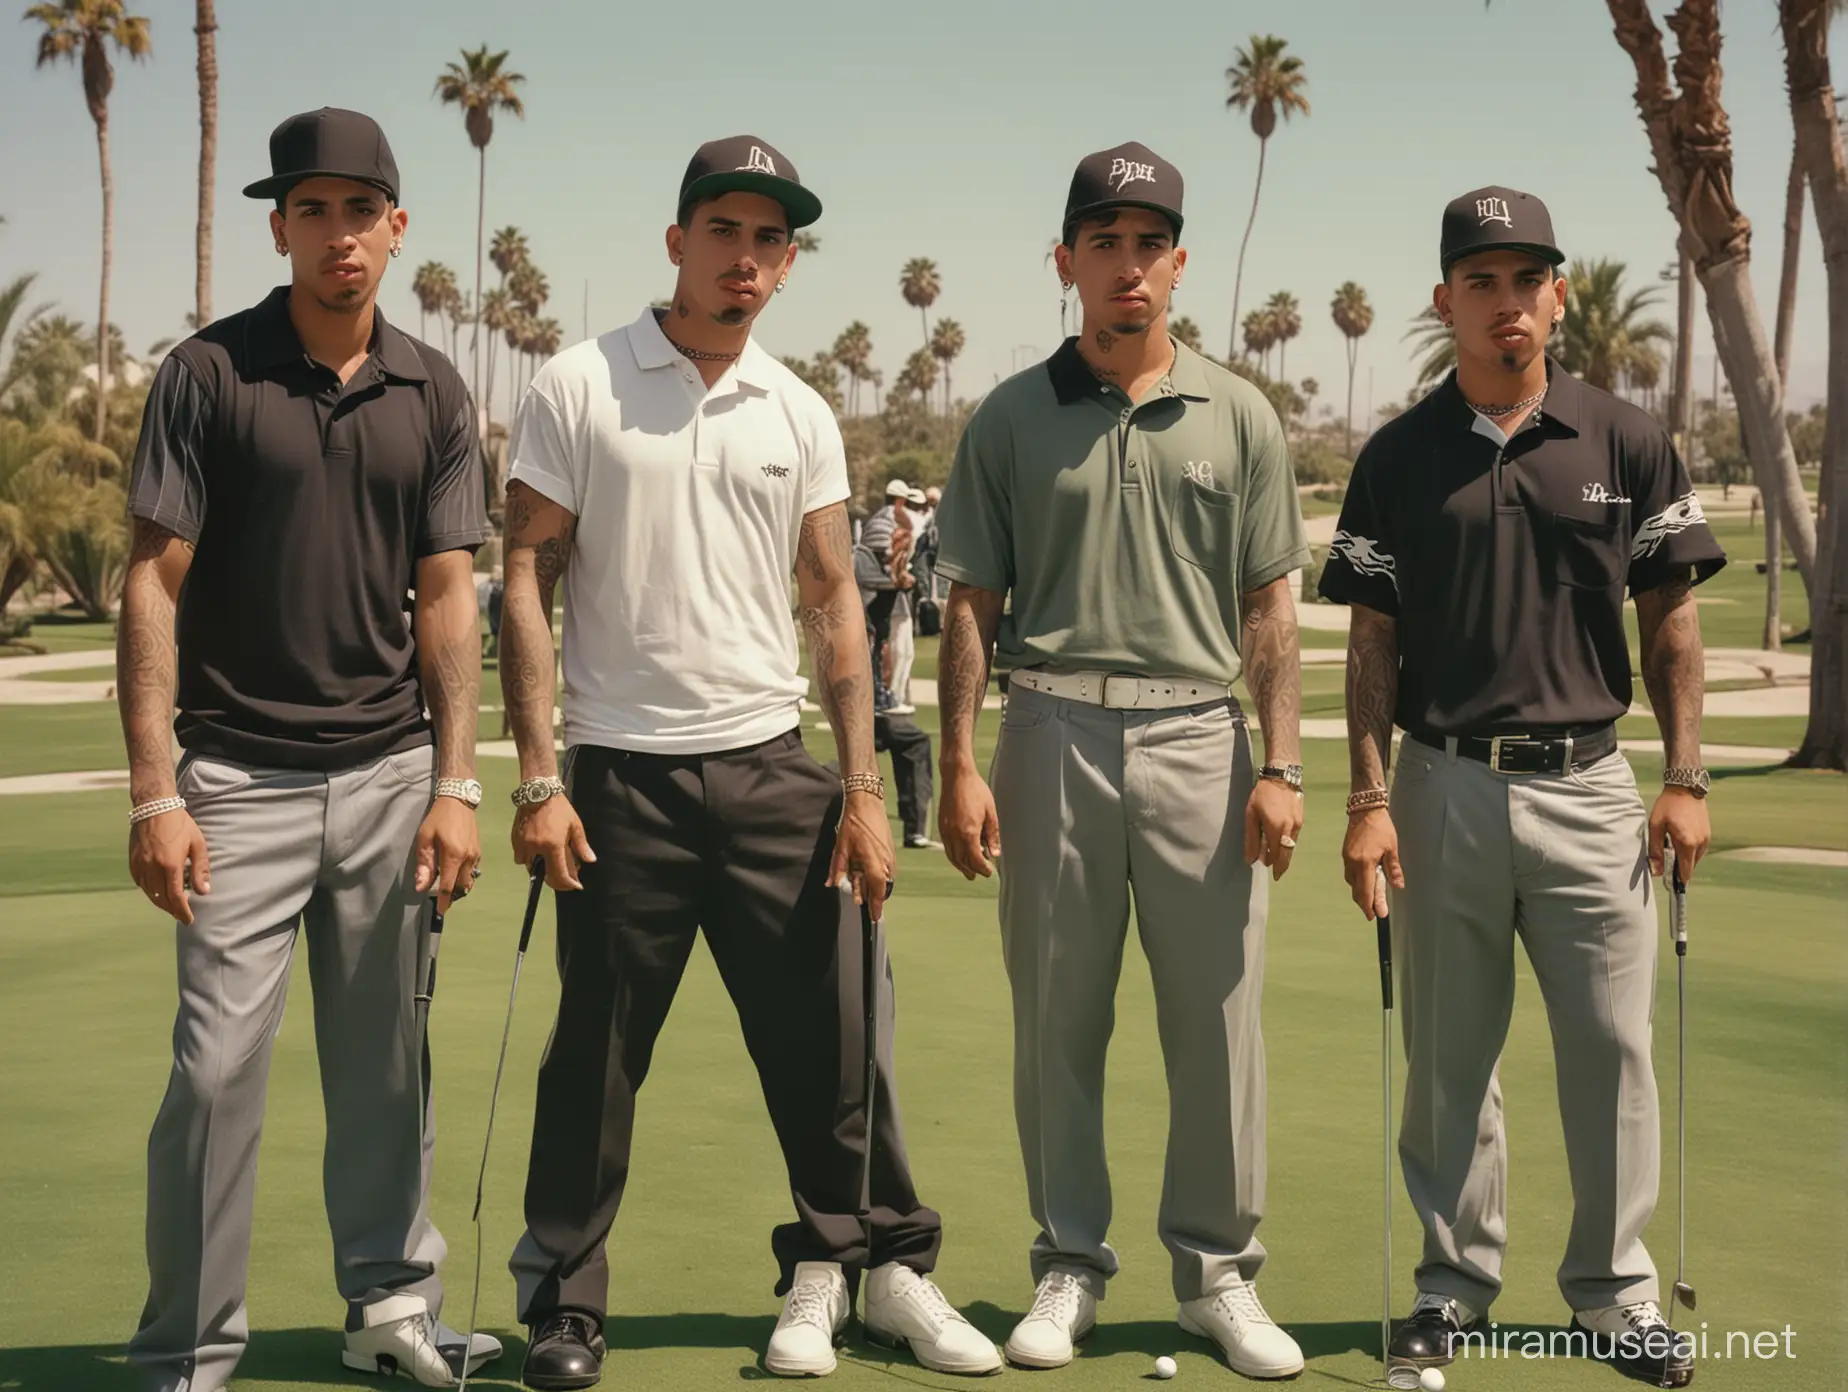 Tattooed hispanic young male cholo gangsters playing golf in 1990s los angeles palms